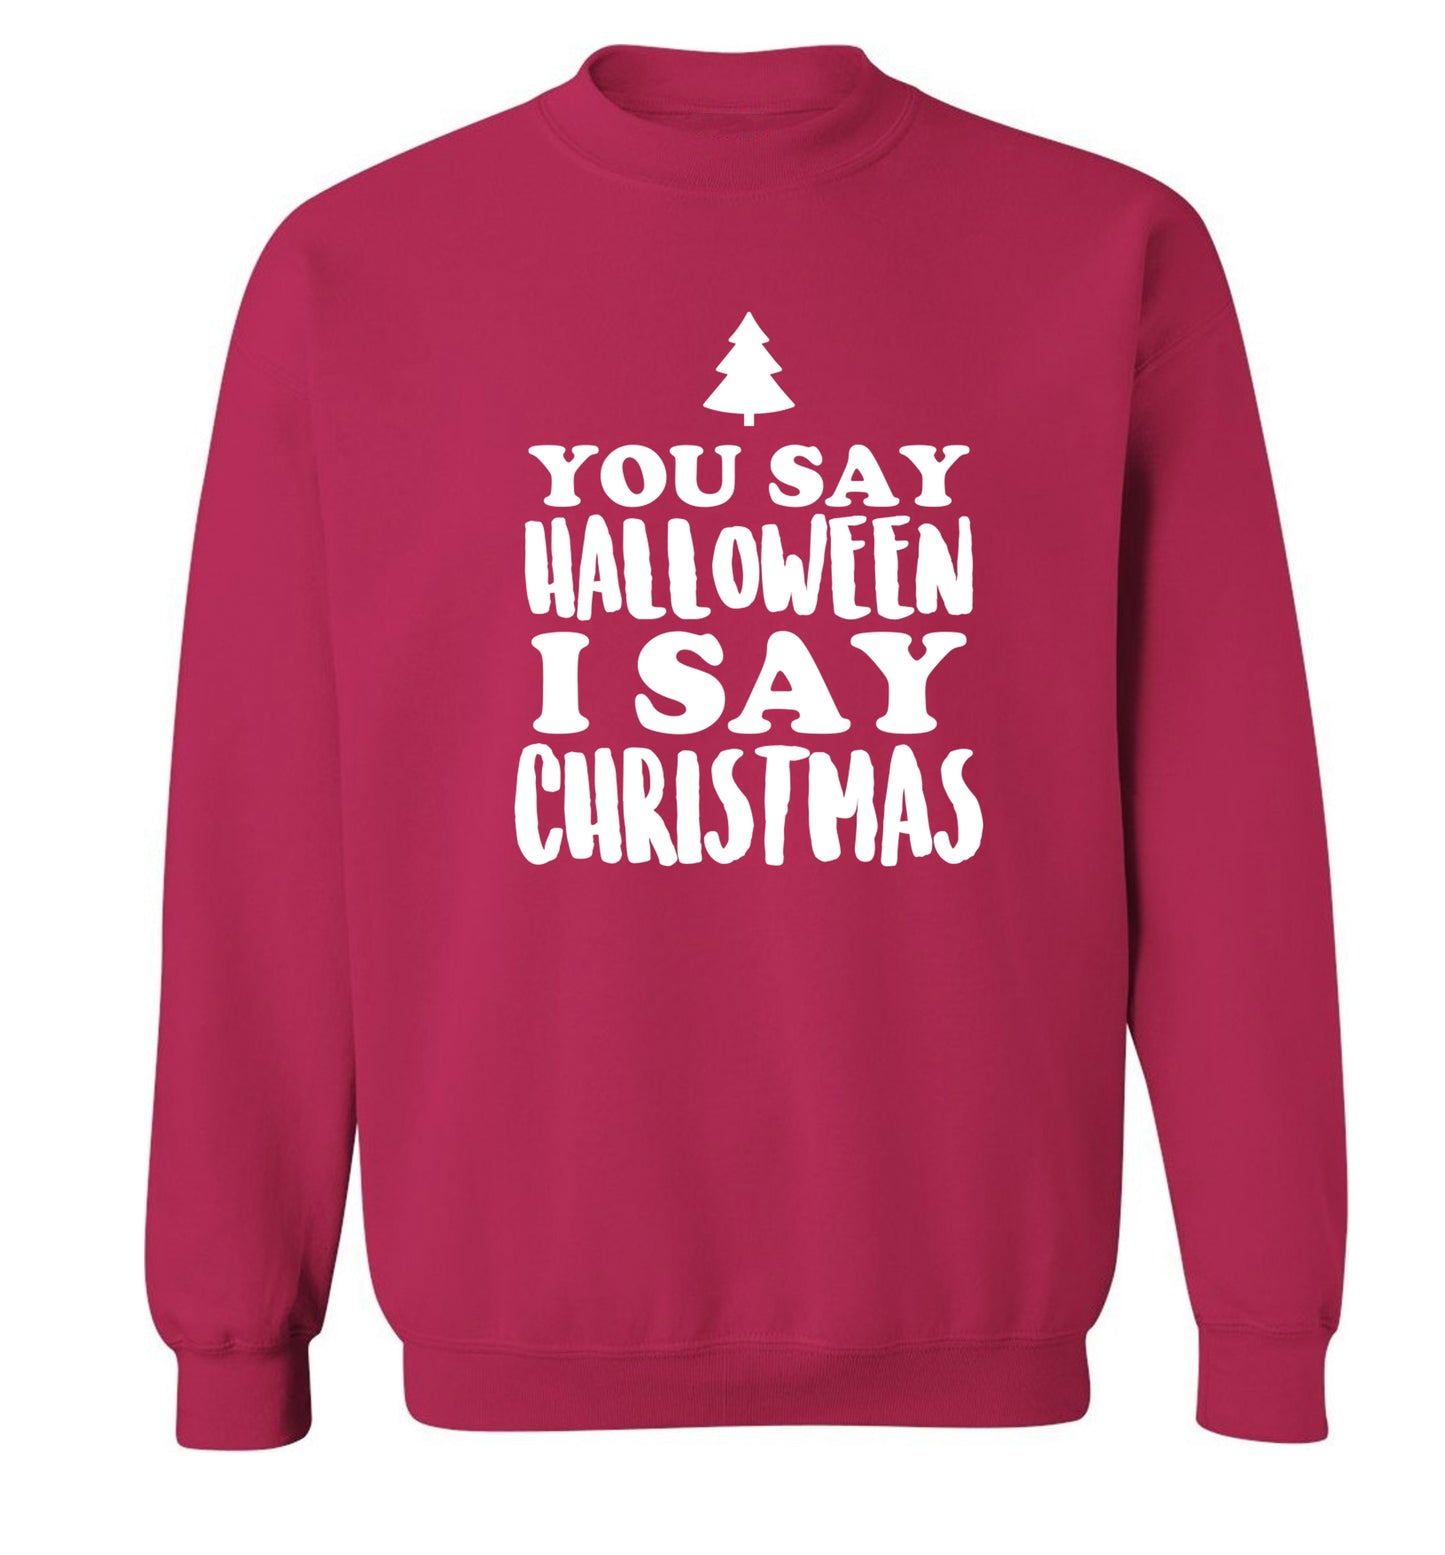 You say halloween I say christmas! Adult's unisex pink Sweater 2XL